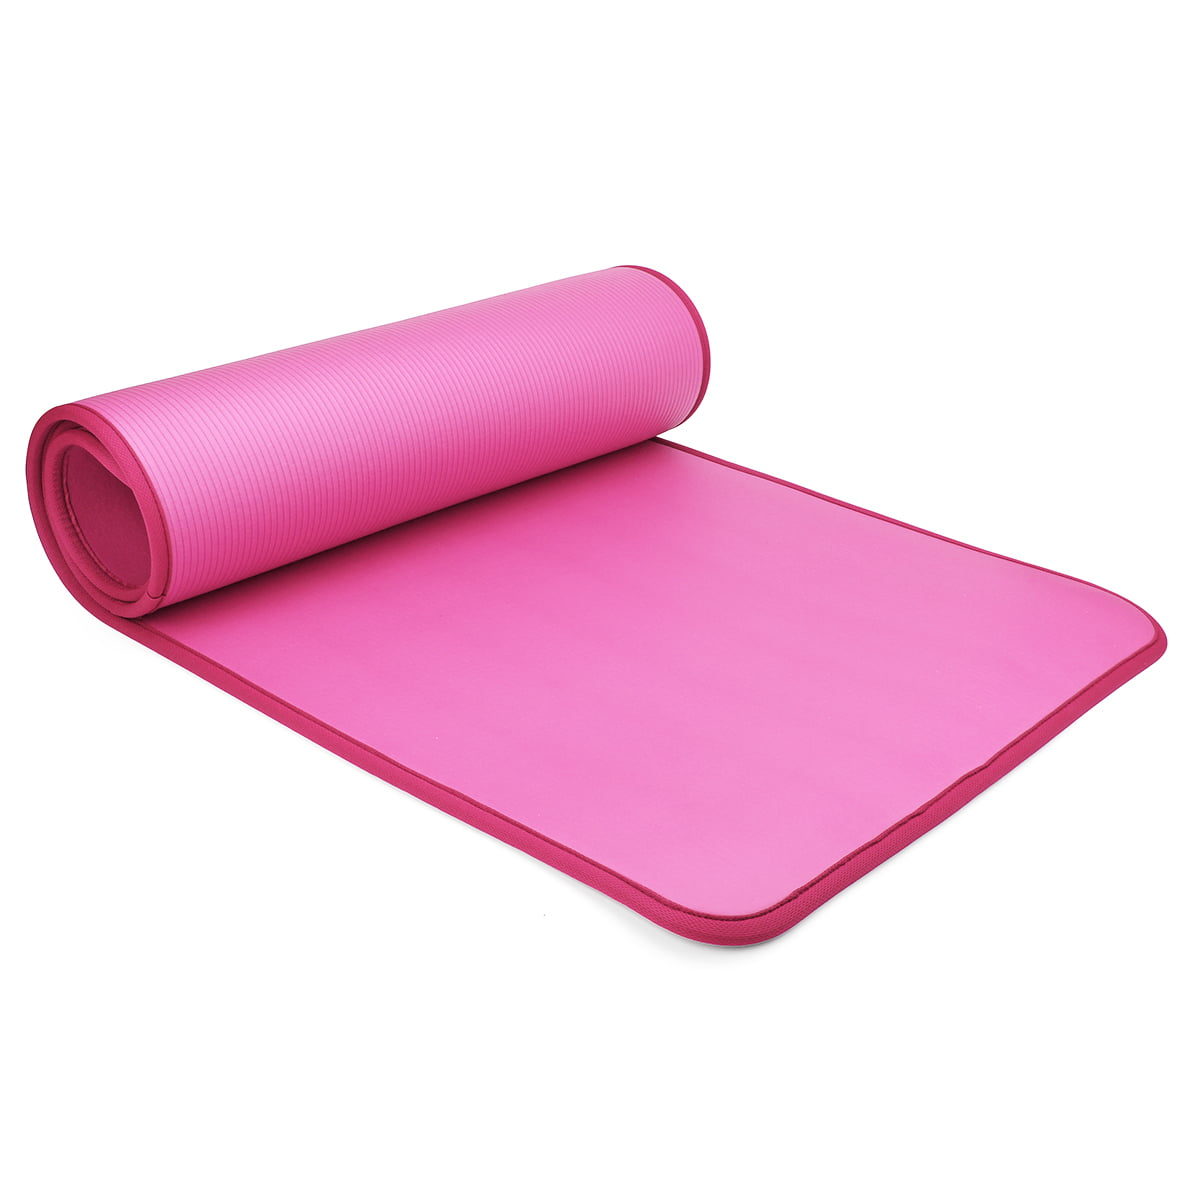 Durable 72x24x0.6" 15mm Thick Yoga Mat Nonslip Pad Exercise Fitness Pilates 